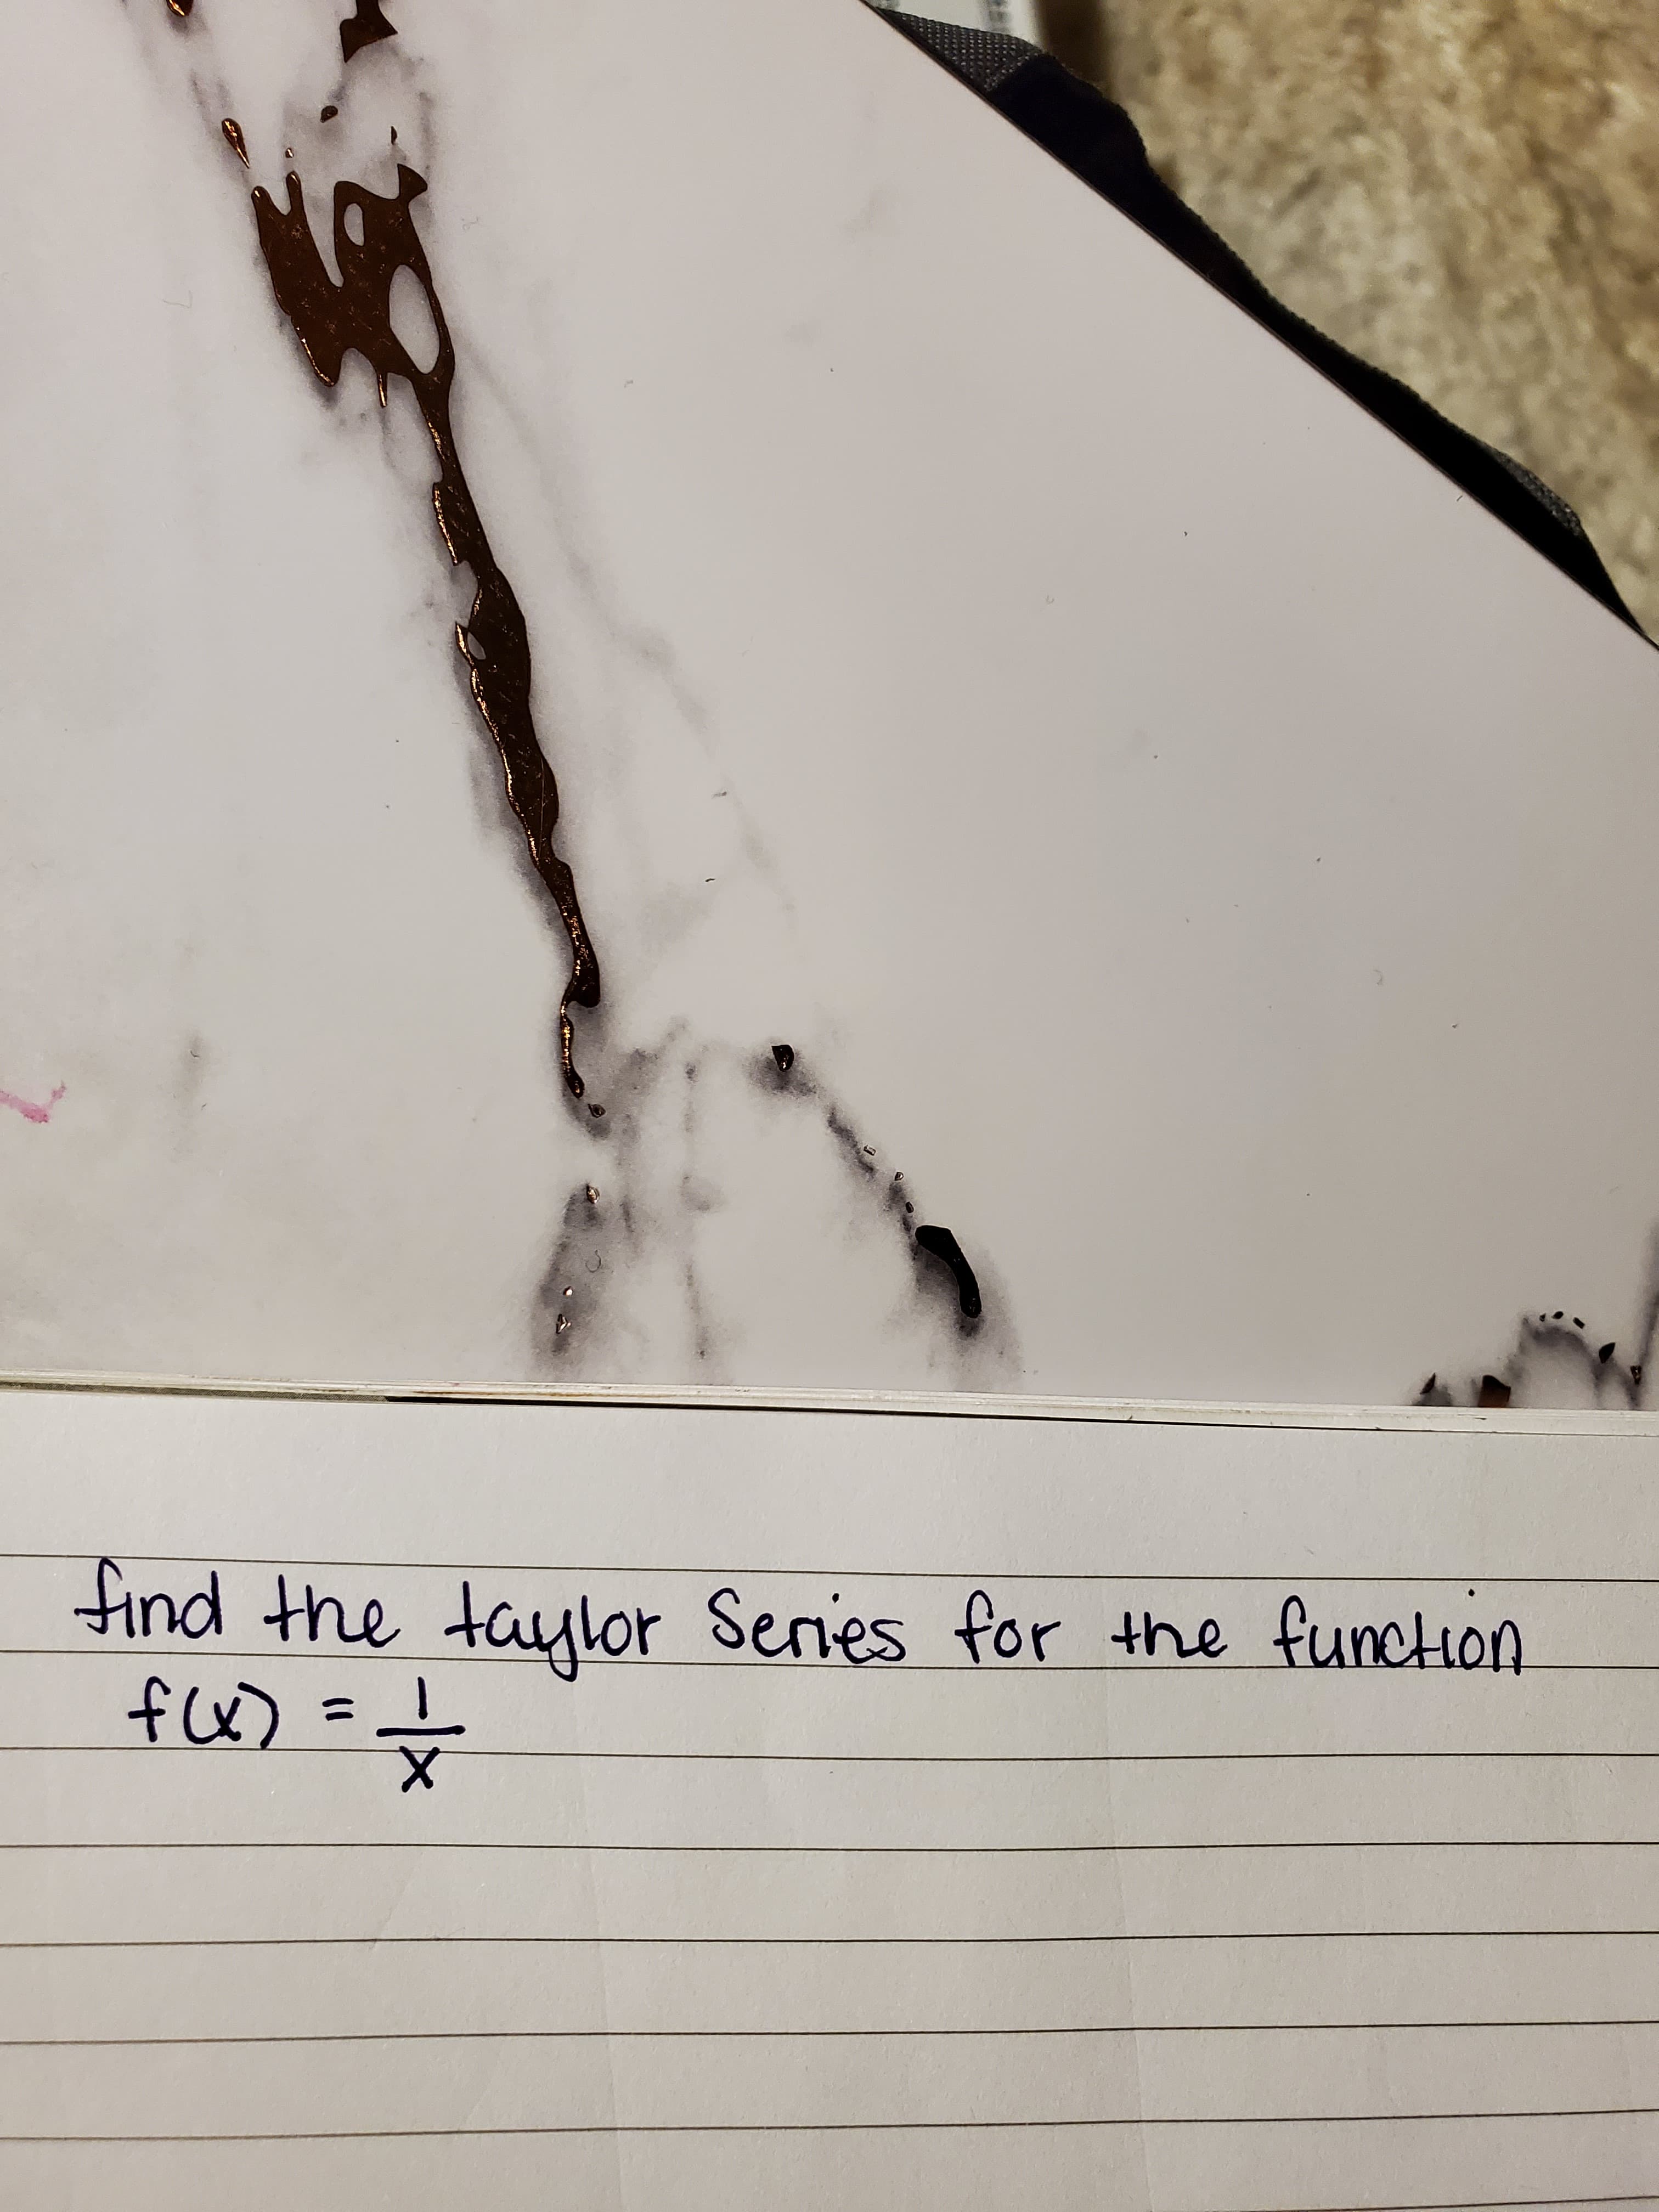 I the taylor Series for the function
